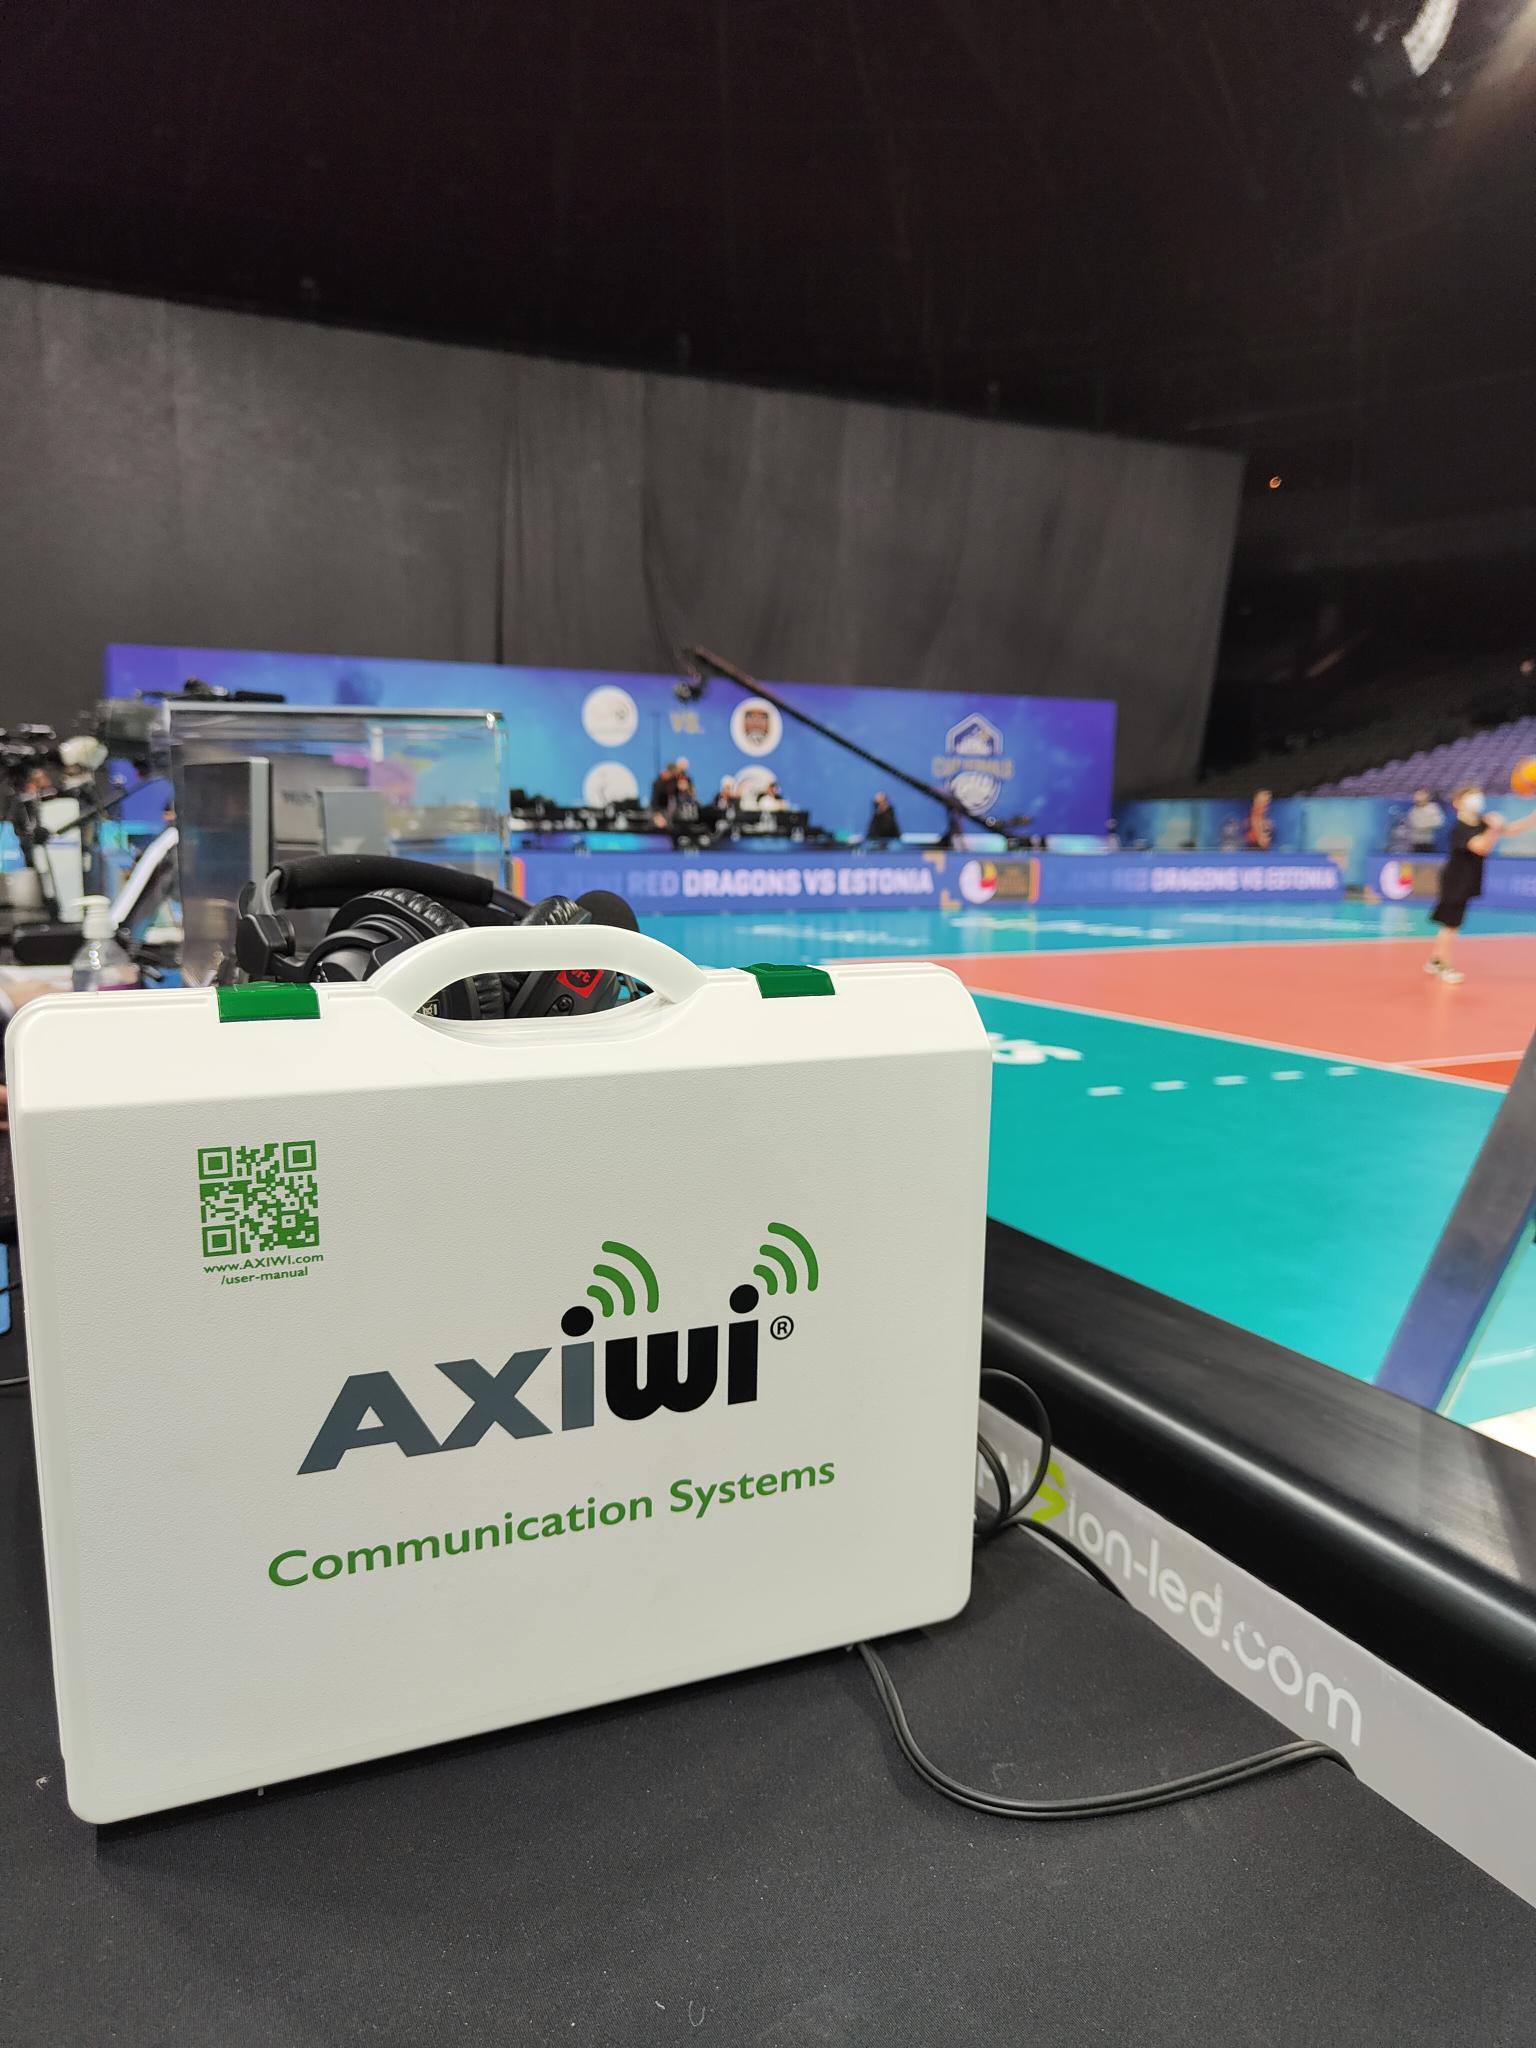 volleyball-referee-headset-challenge-team-axiwi